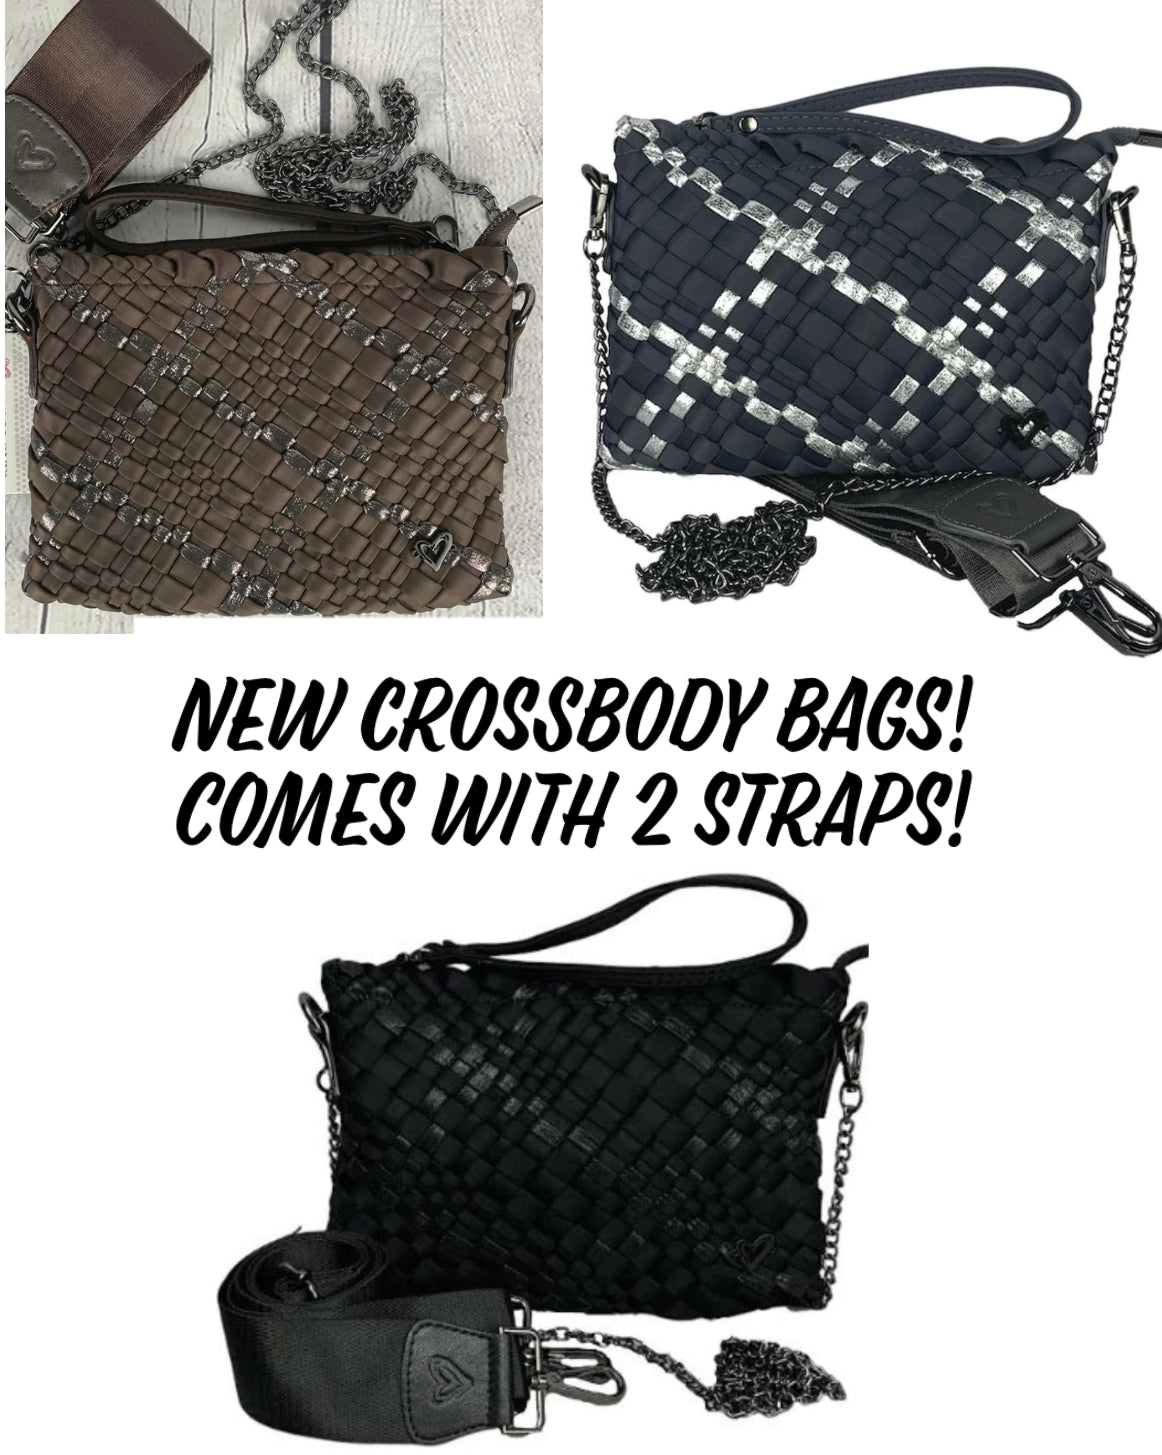 Woven bag with printed & chain strap (can be worn as a crossbody, shoulder bag or wristlet)